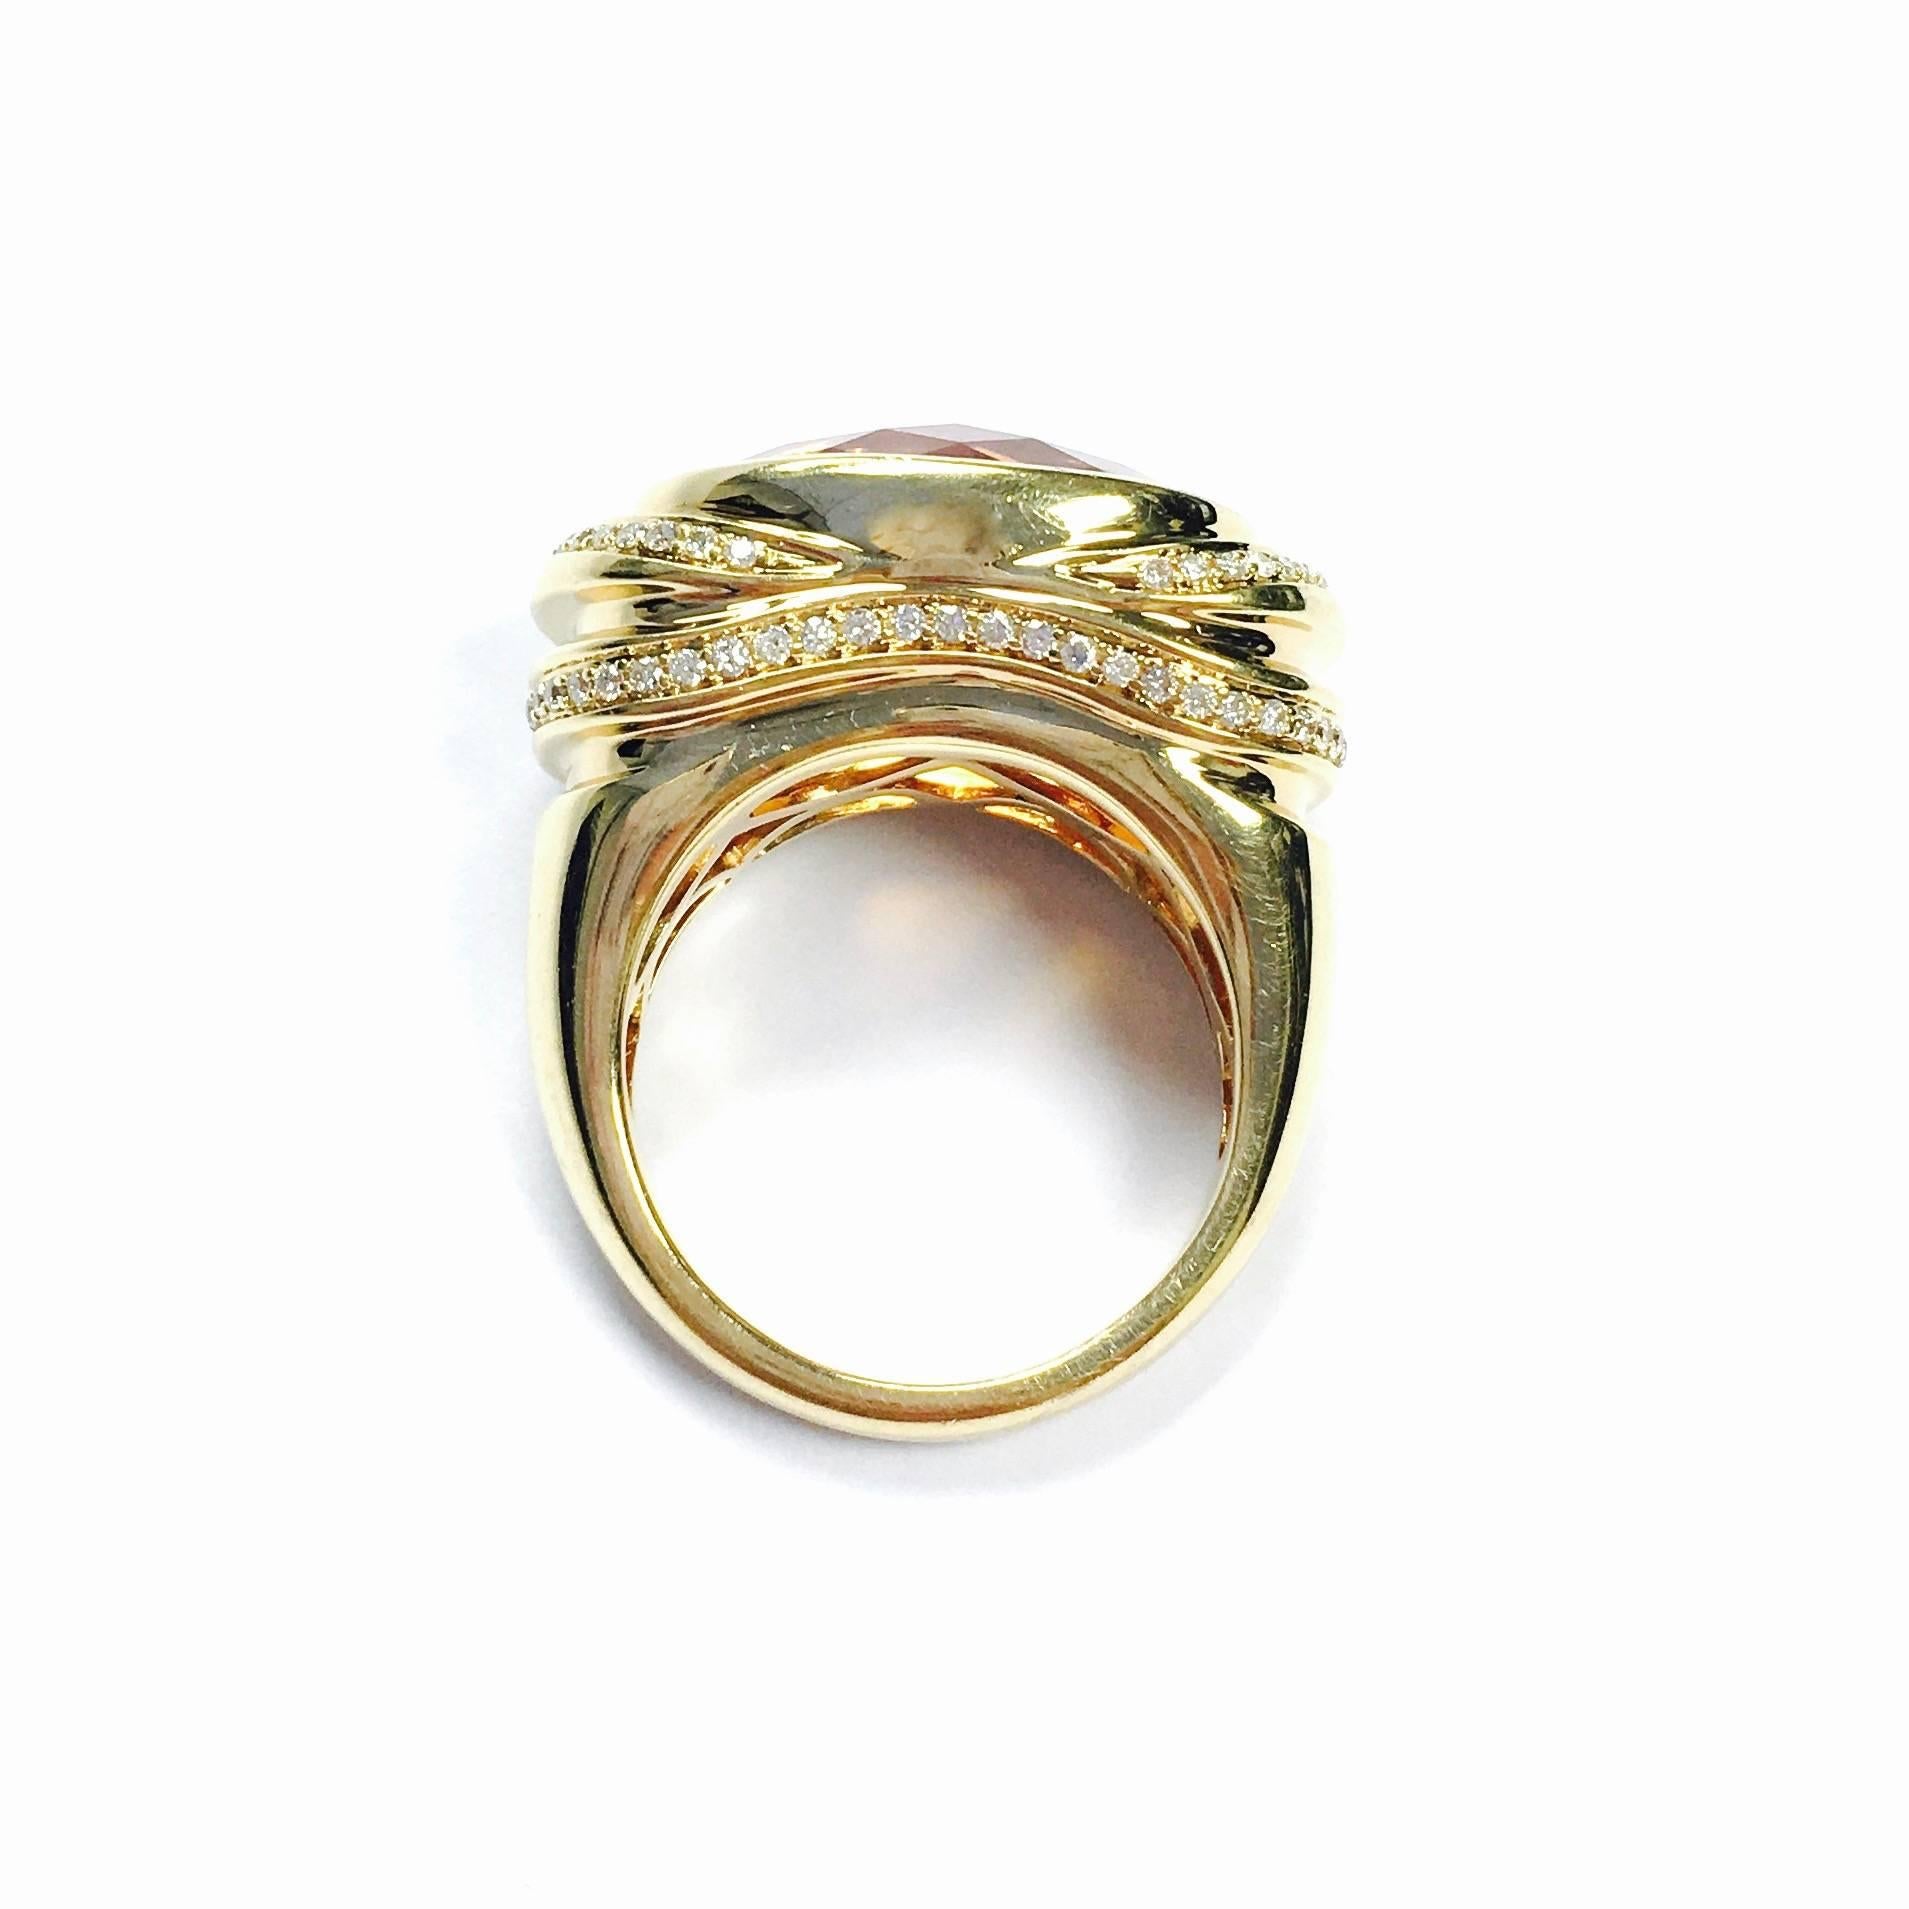 Crafted in 18K yellow gold, featuring an approximately 15 carat  bezel set oval checkerboard cut citrine, supported by scalloped diamond set shoulders and a fully finished under gallery, completed by a three millimeter wide band. 
The front